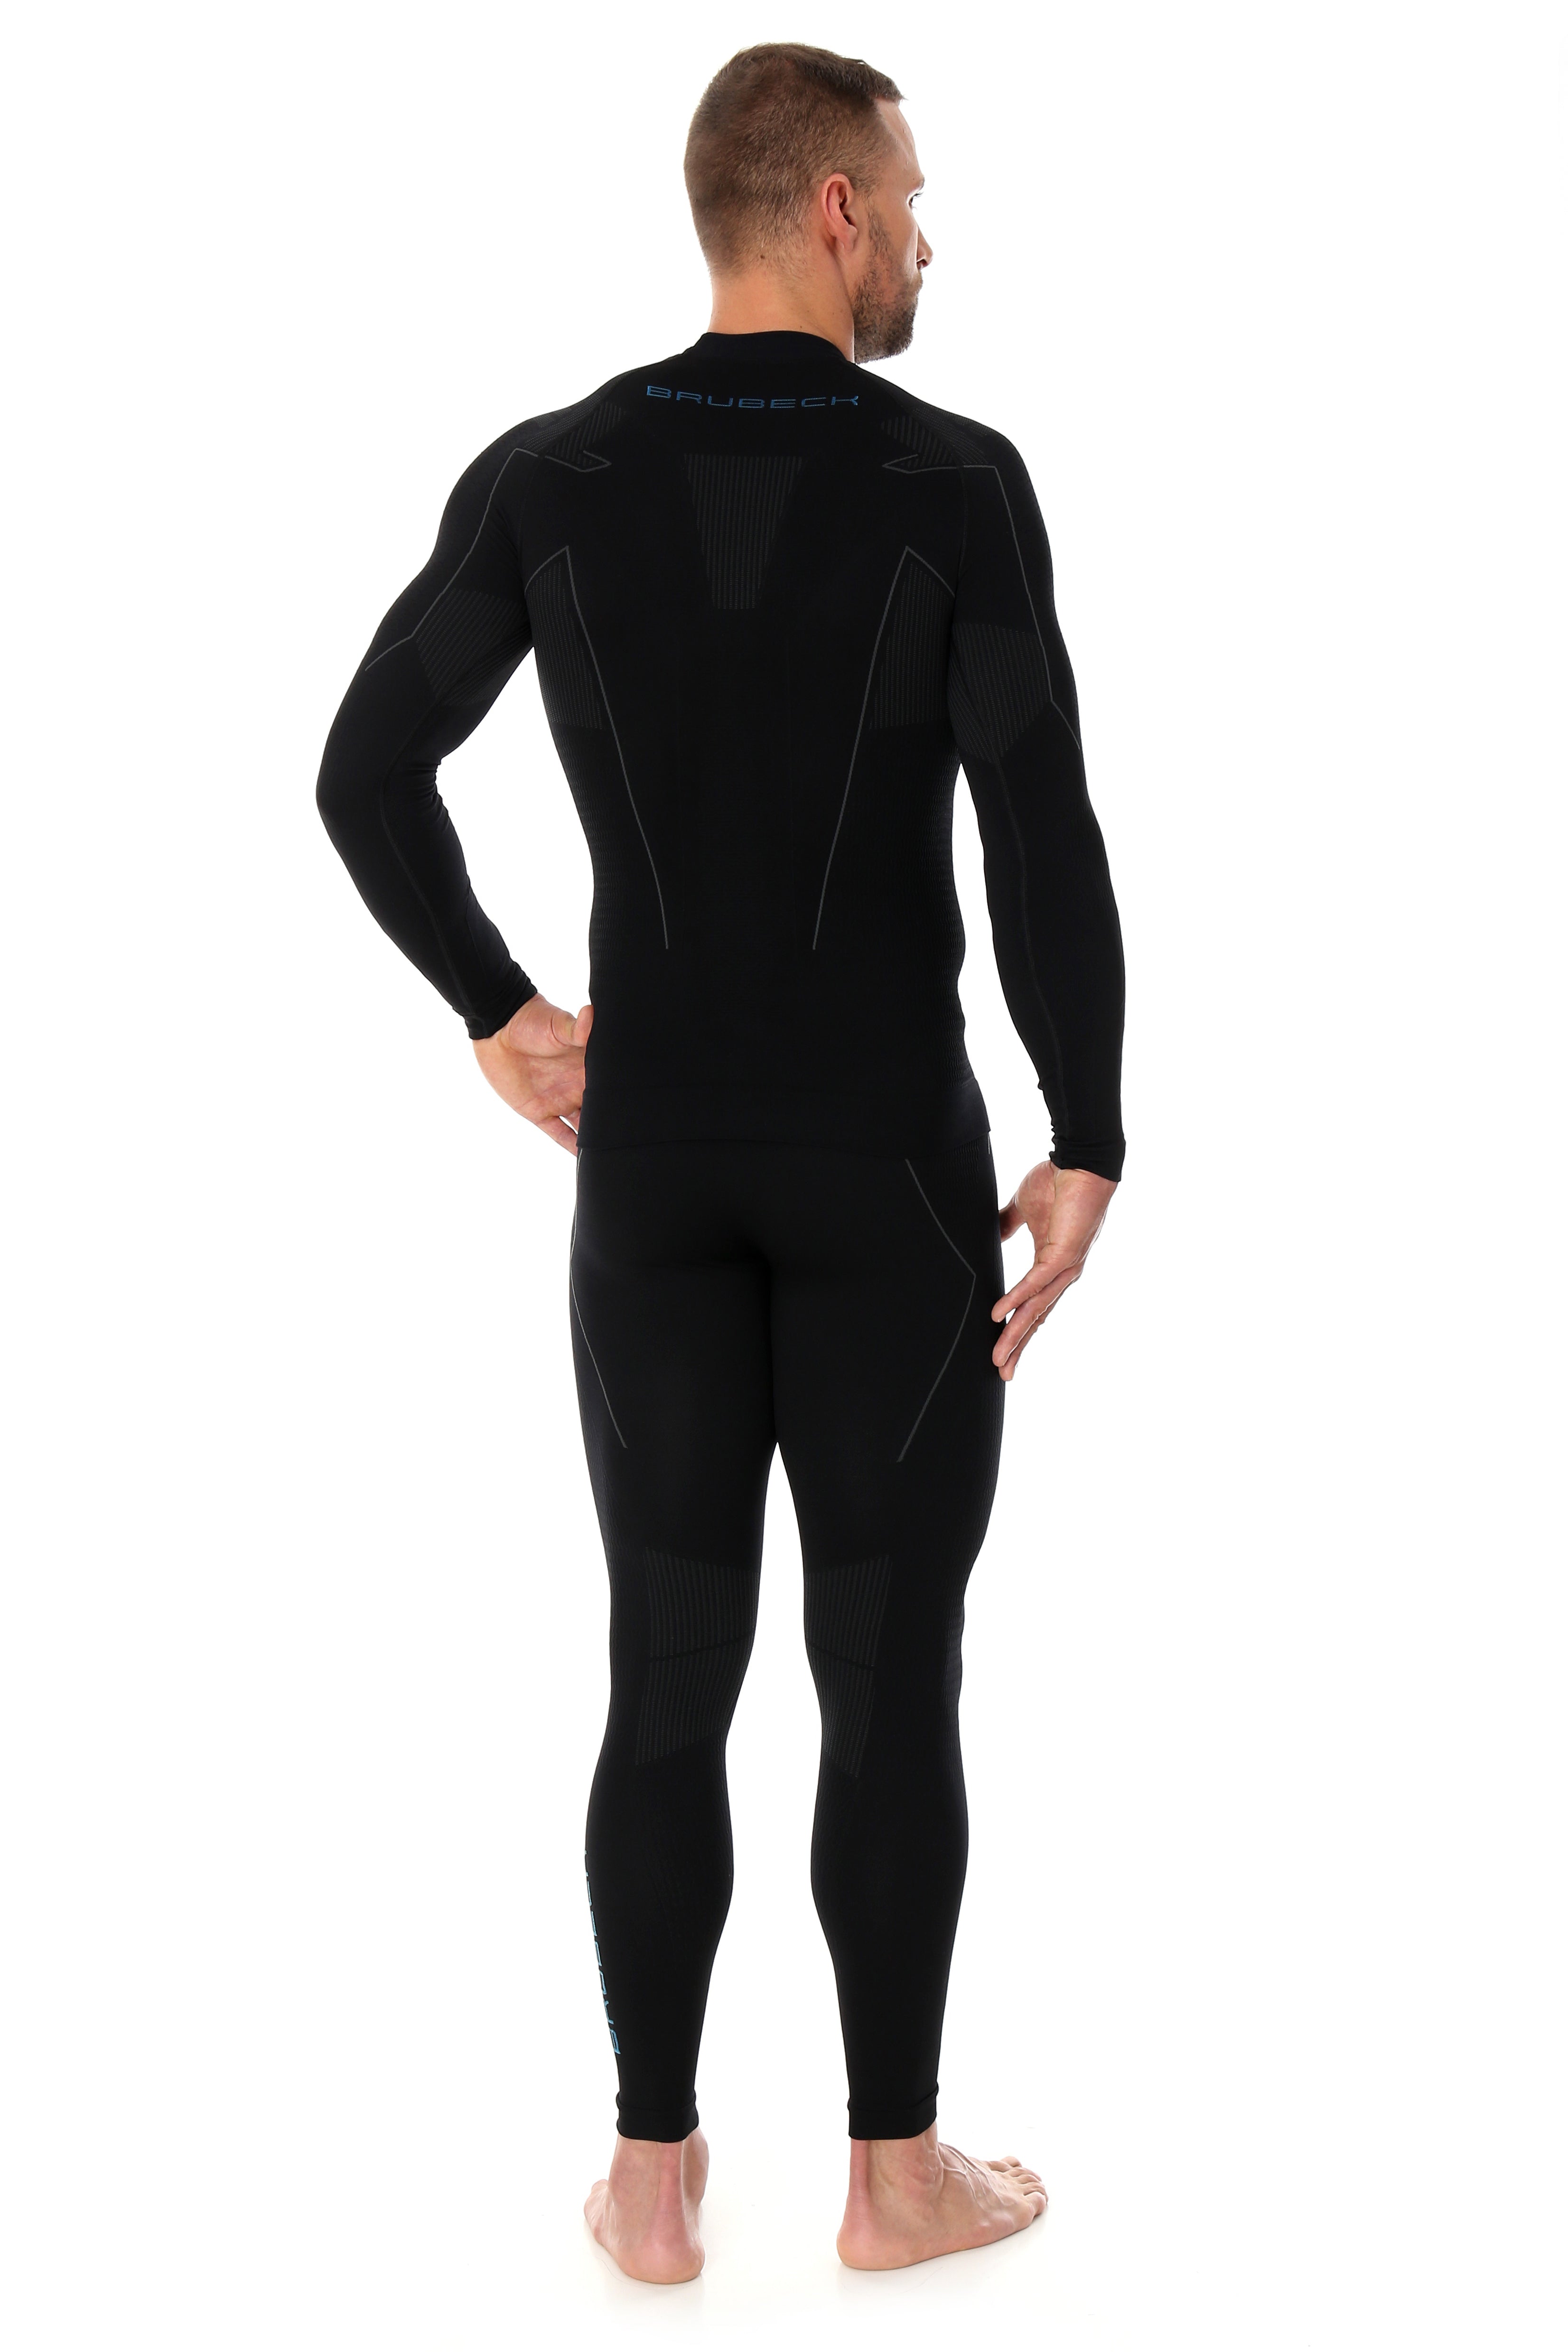 Men's THERMO long-sleeve base layer in sleek black. With the BRUBECK logo between the shoulder blades 